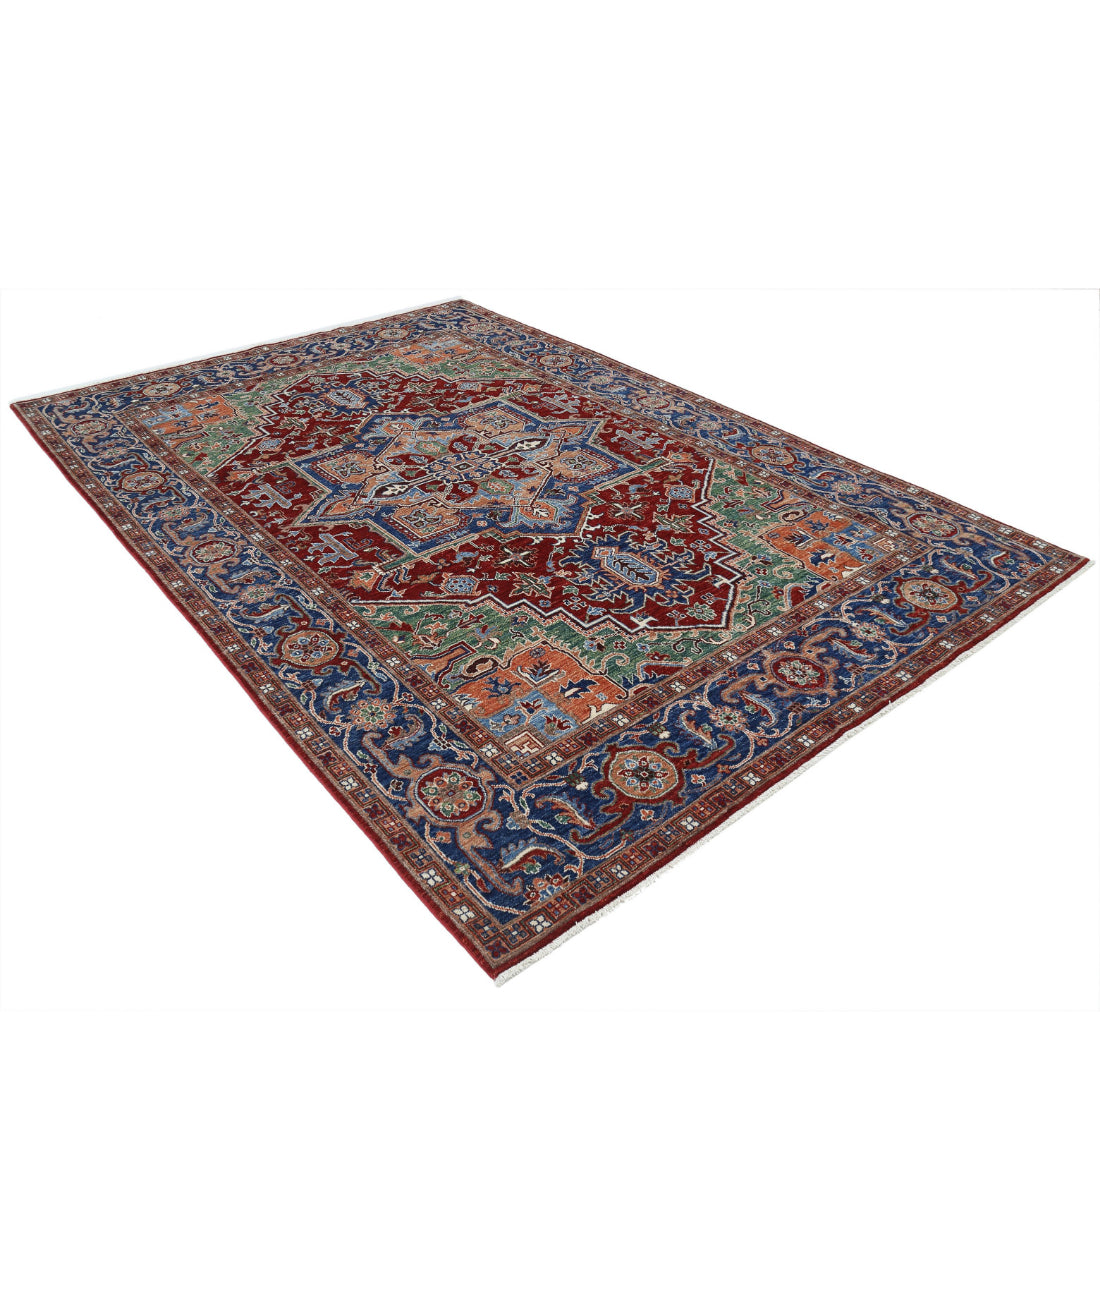 Hand Knotted Heriz Wool Rug - 6'9'' x 9'8'' 6'9'' x 9'8'' (203 X 290) / Red / Blue